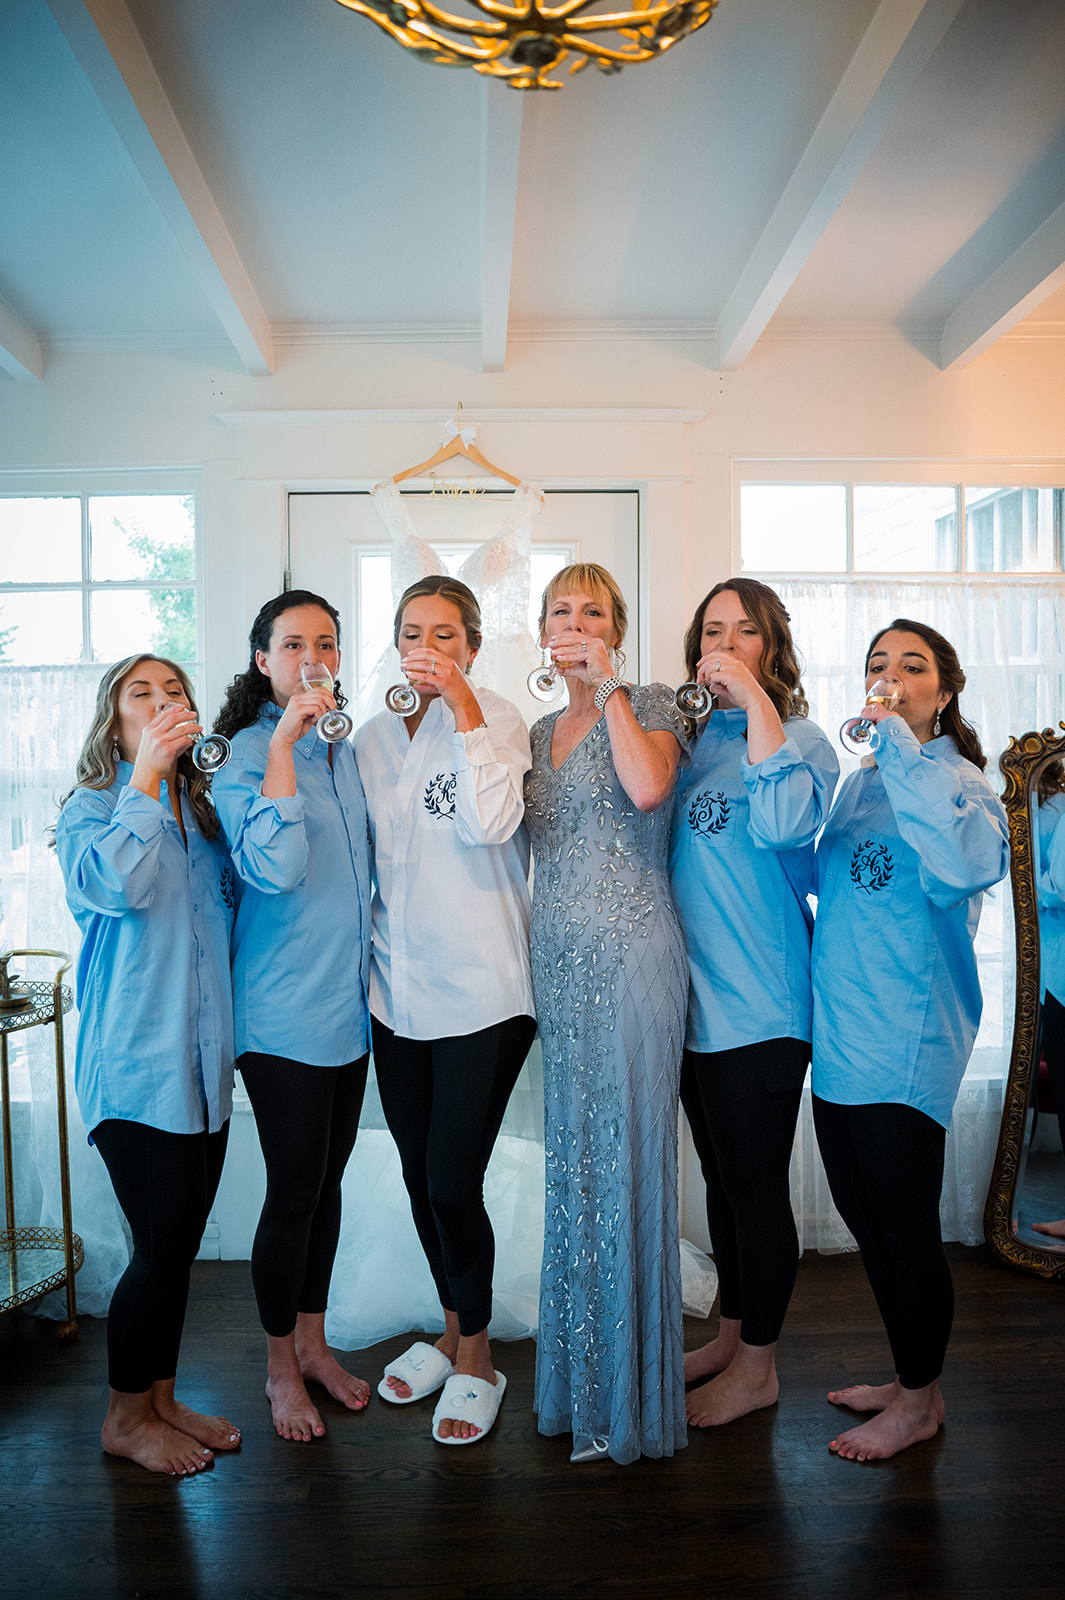 Bride shares sip of champagne with her bridesmaids who are all dressed in pajamas.